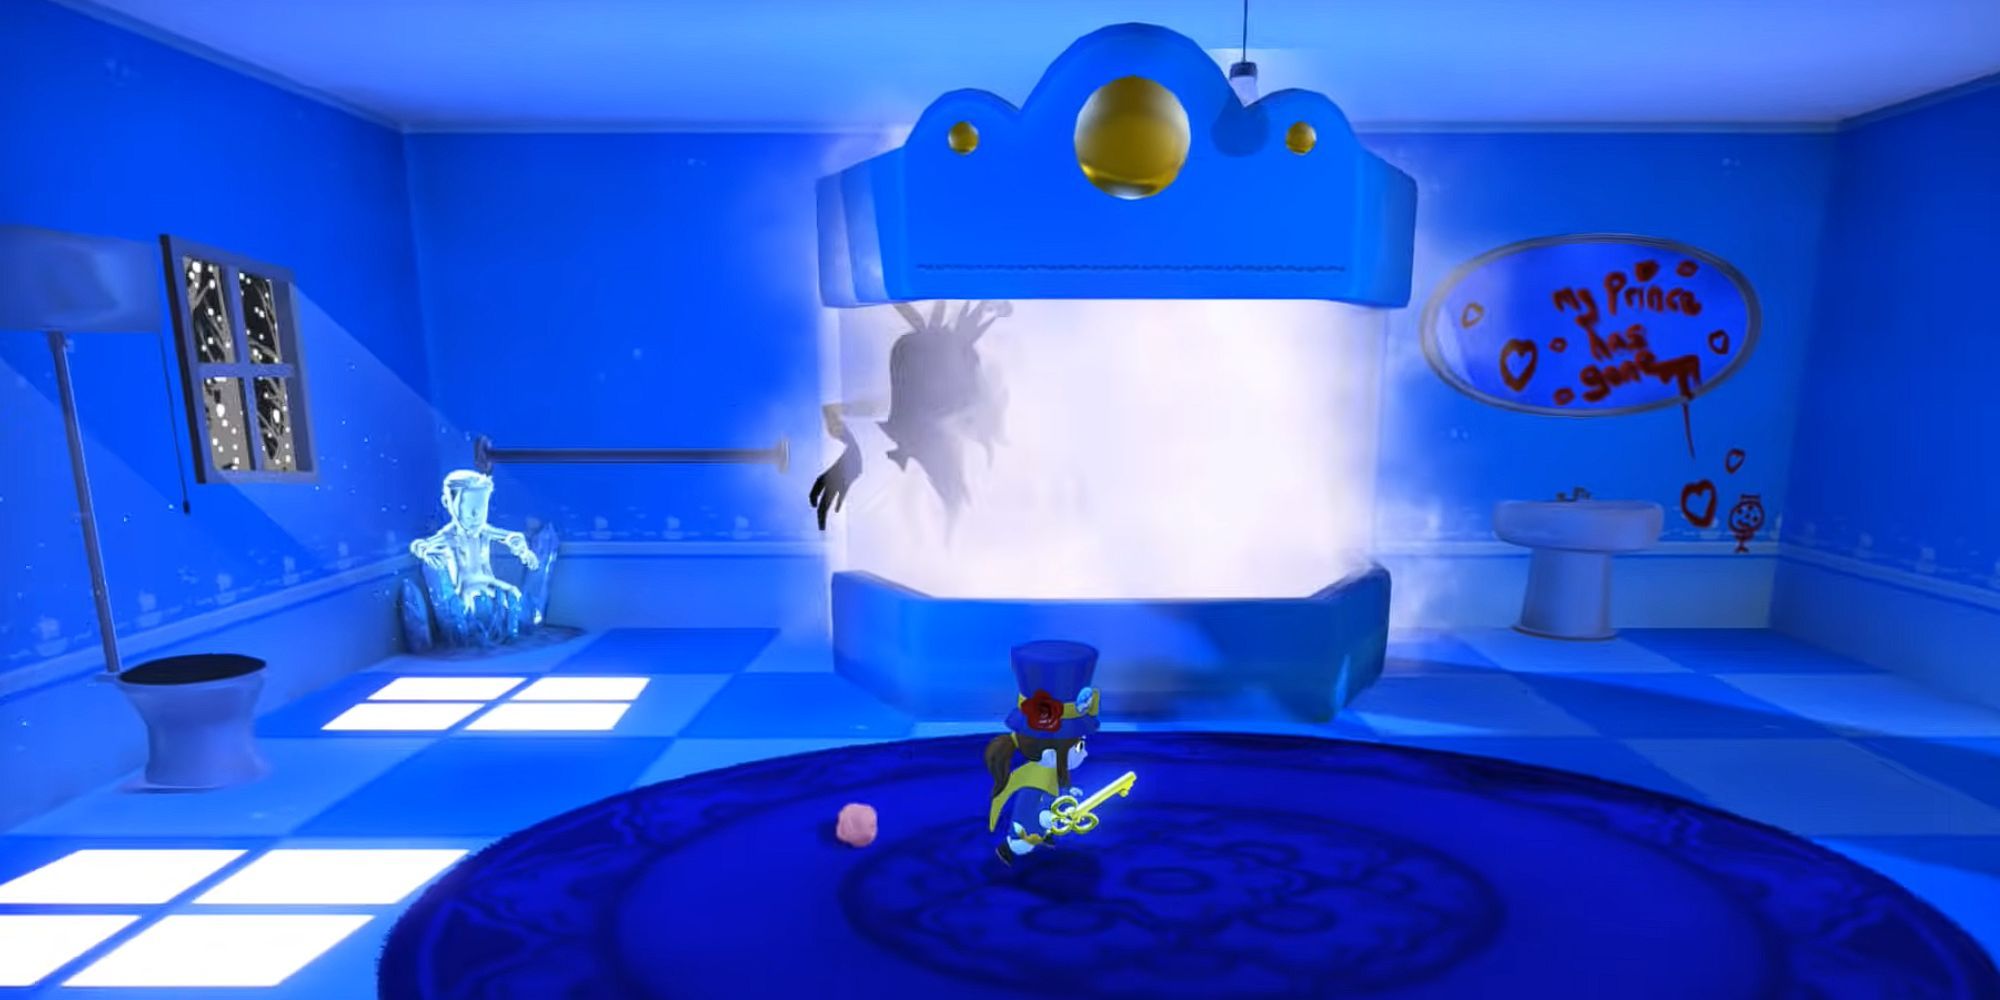 Hat Kid runs past Vanessa in her bath to the other end of the bathroom, with bloody writing on the mirror and a frozen figure sitting on a chair